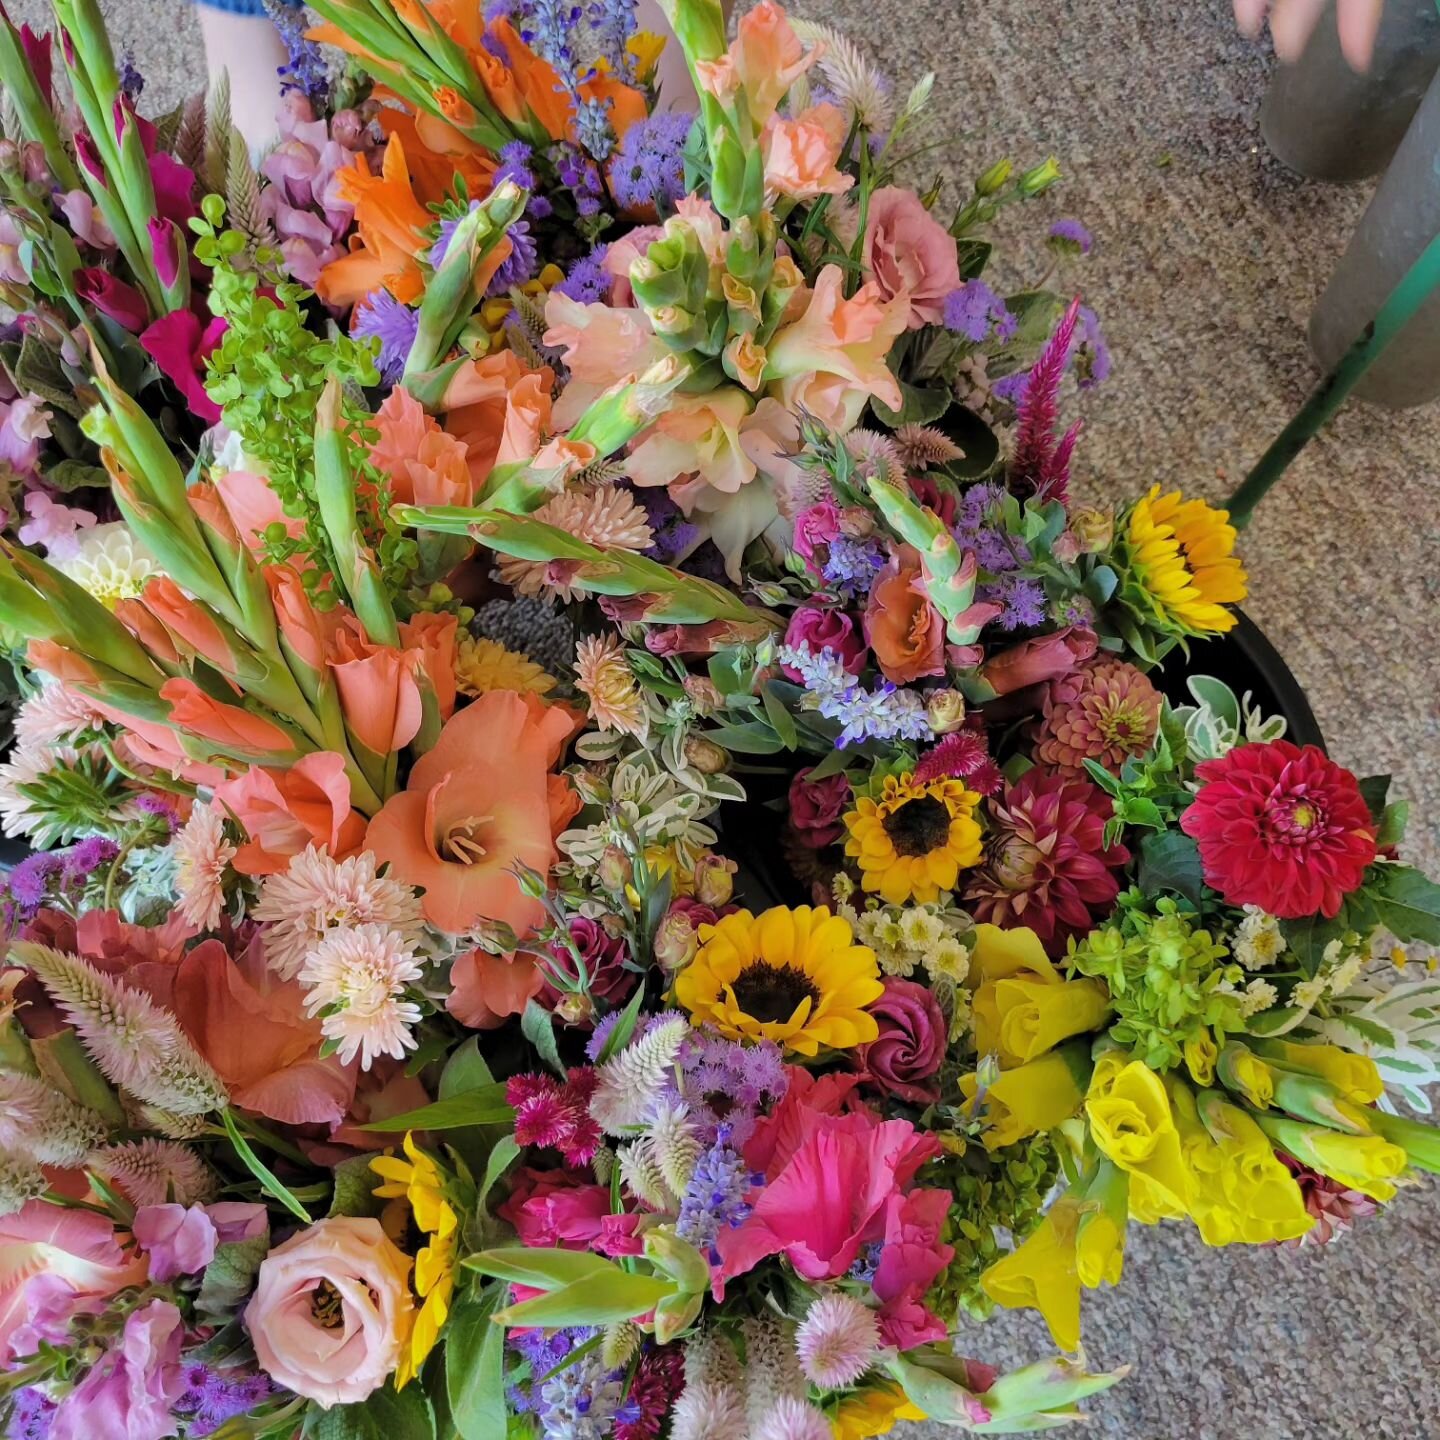 Its Thursday....you know what that means! 
Fresh floral delivery from Mill Creek Flower Farm 🌻